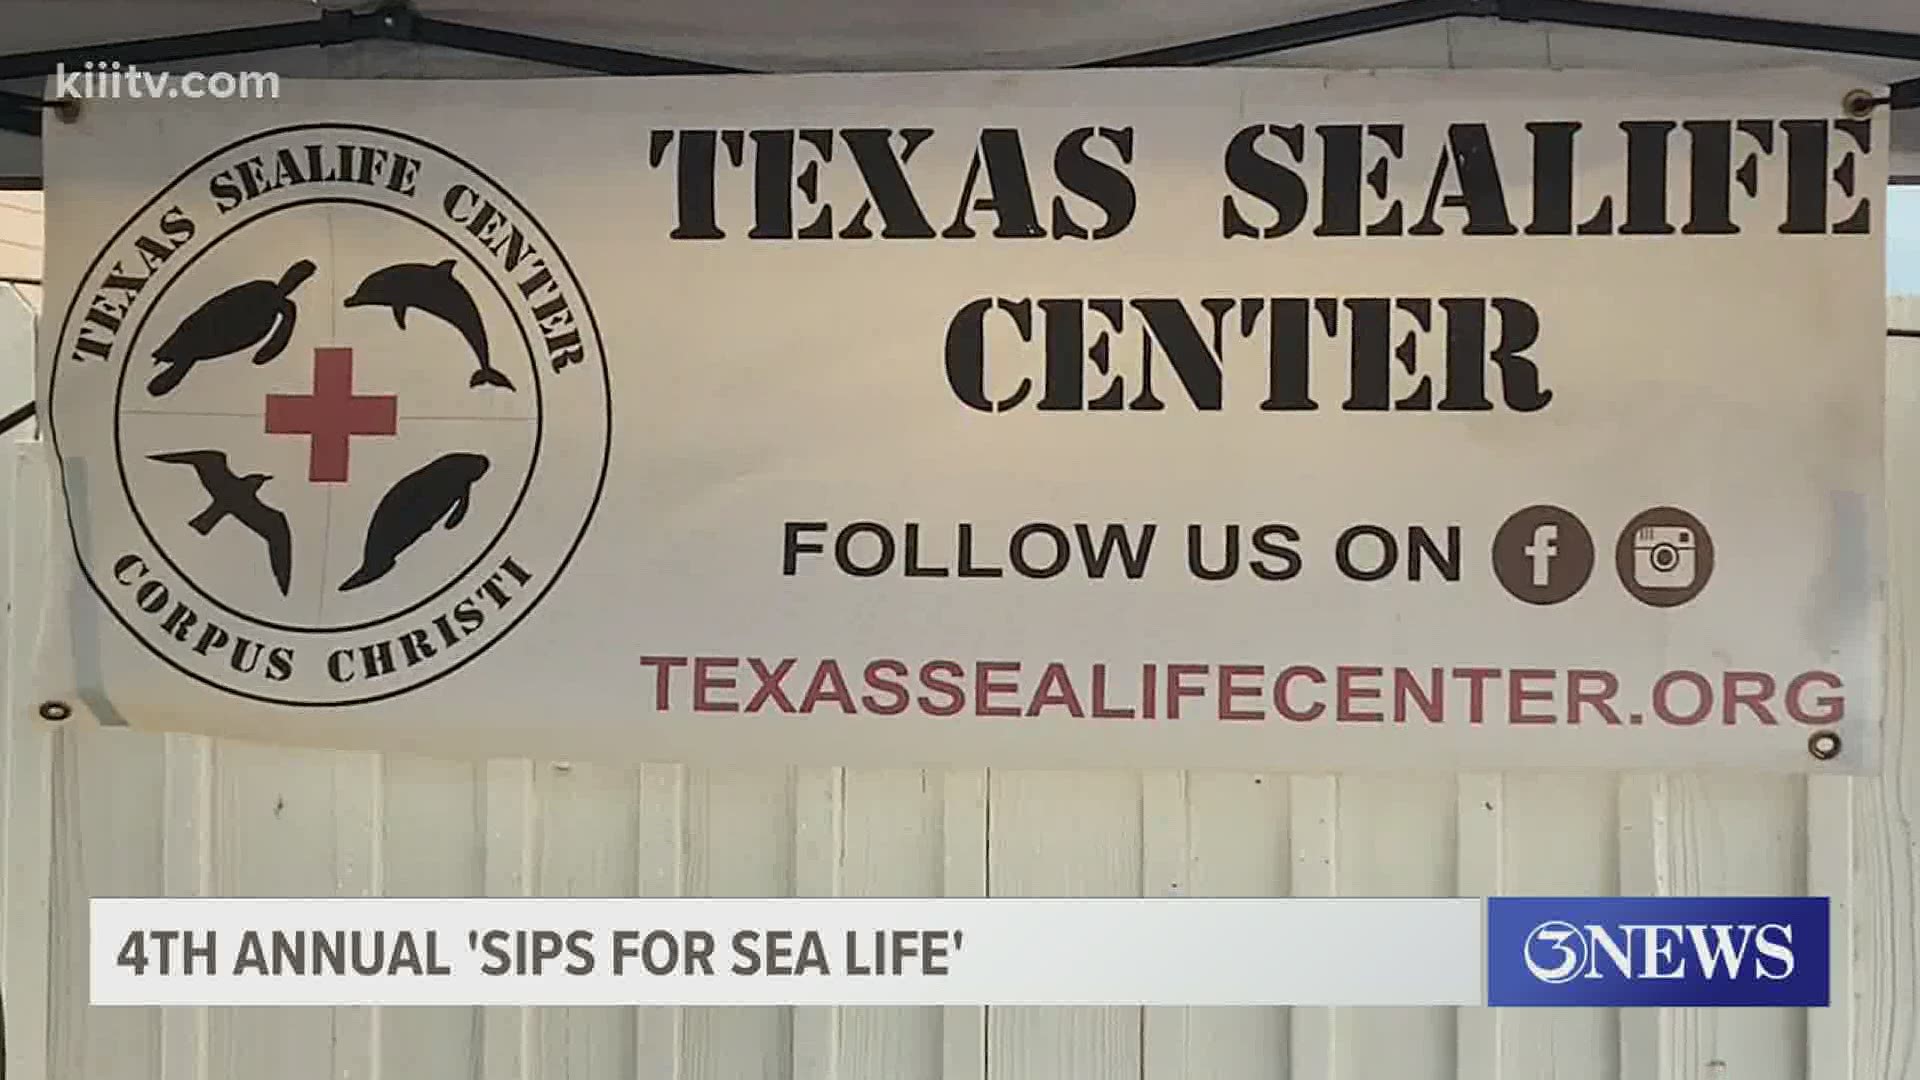 'Sips for Sealife' is an annual event that helps the Texas Sealife Center Corpus Christi and also brings together local vendors.